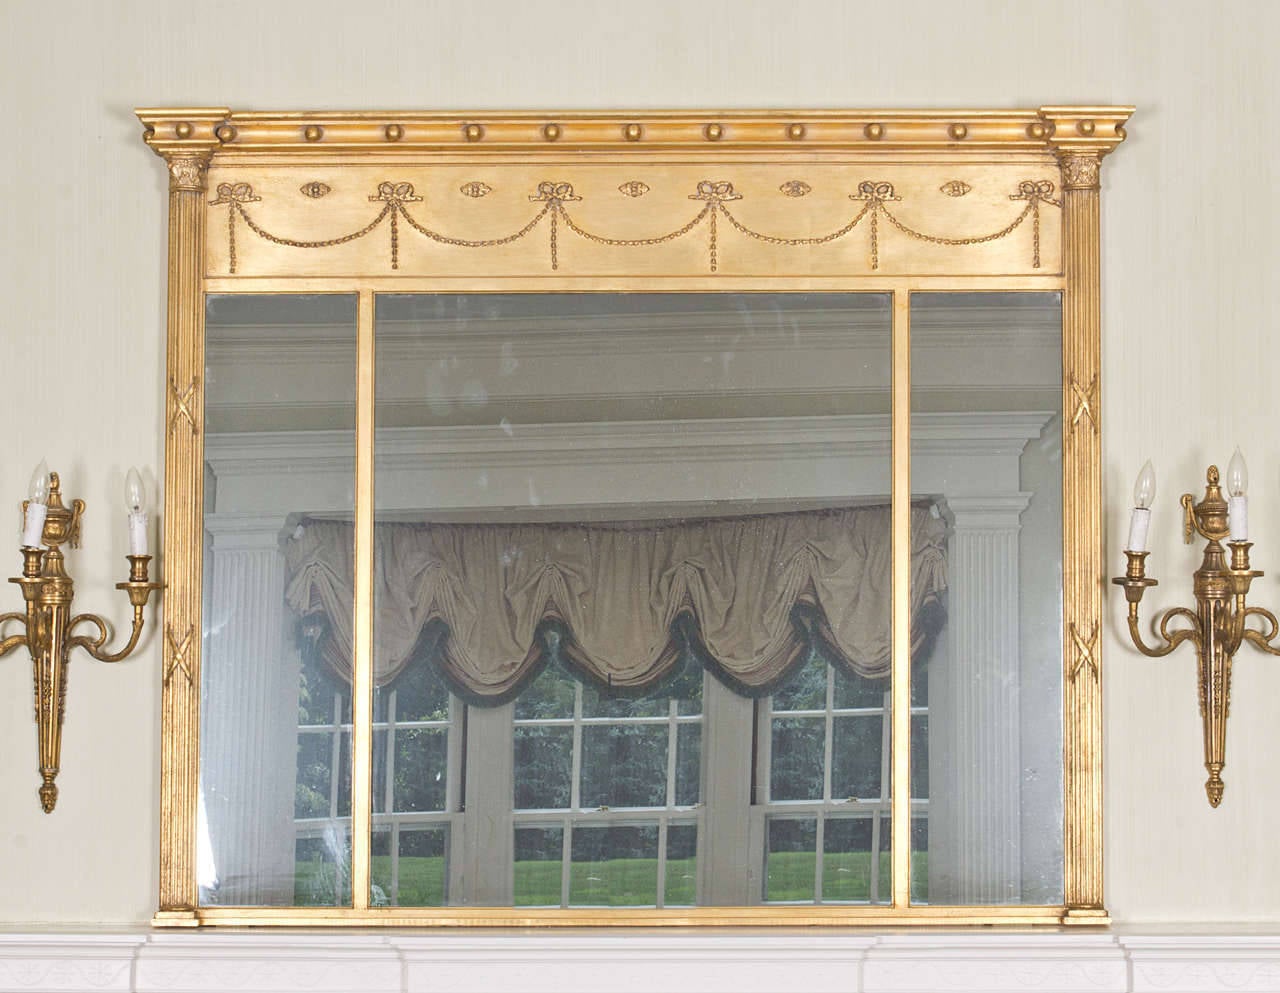 Neoclassical giltwood overmantel mirror of reverse breakfront form; with ribbon-tied garland decoration.